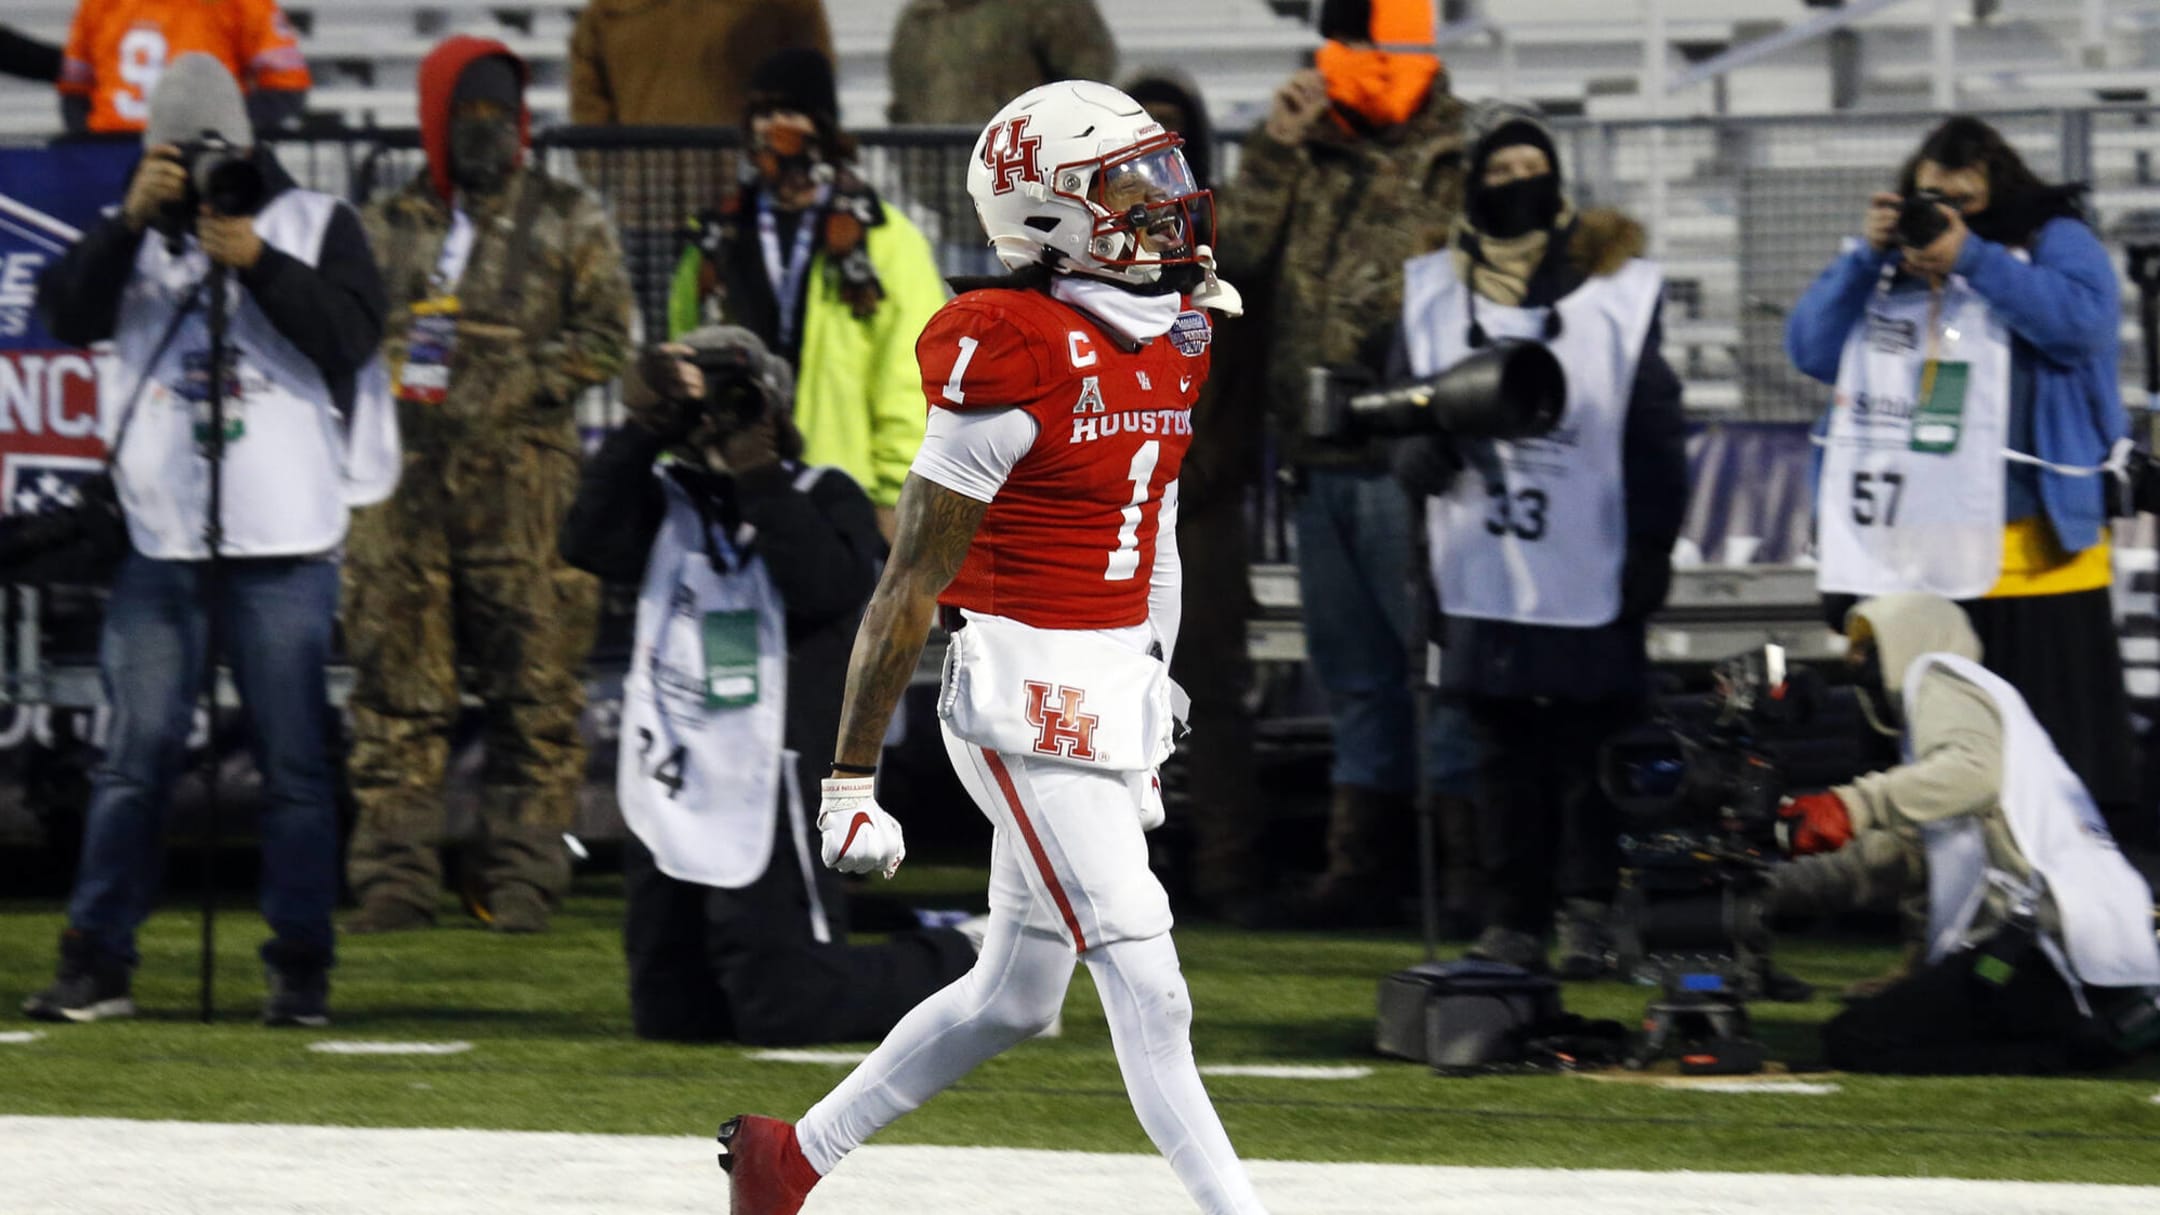 Houston WR Tank Dell selected 69th overall by Houston Texans in